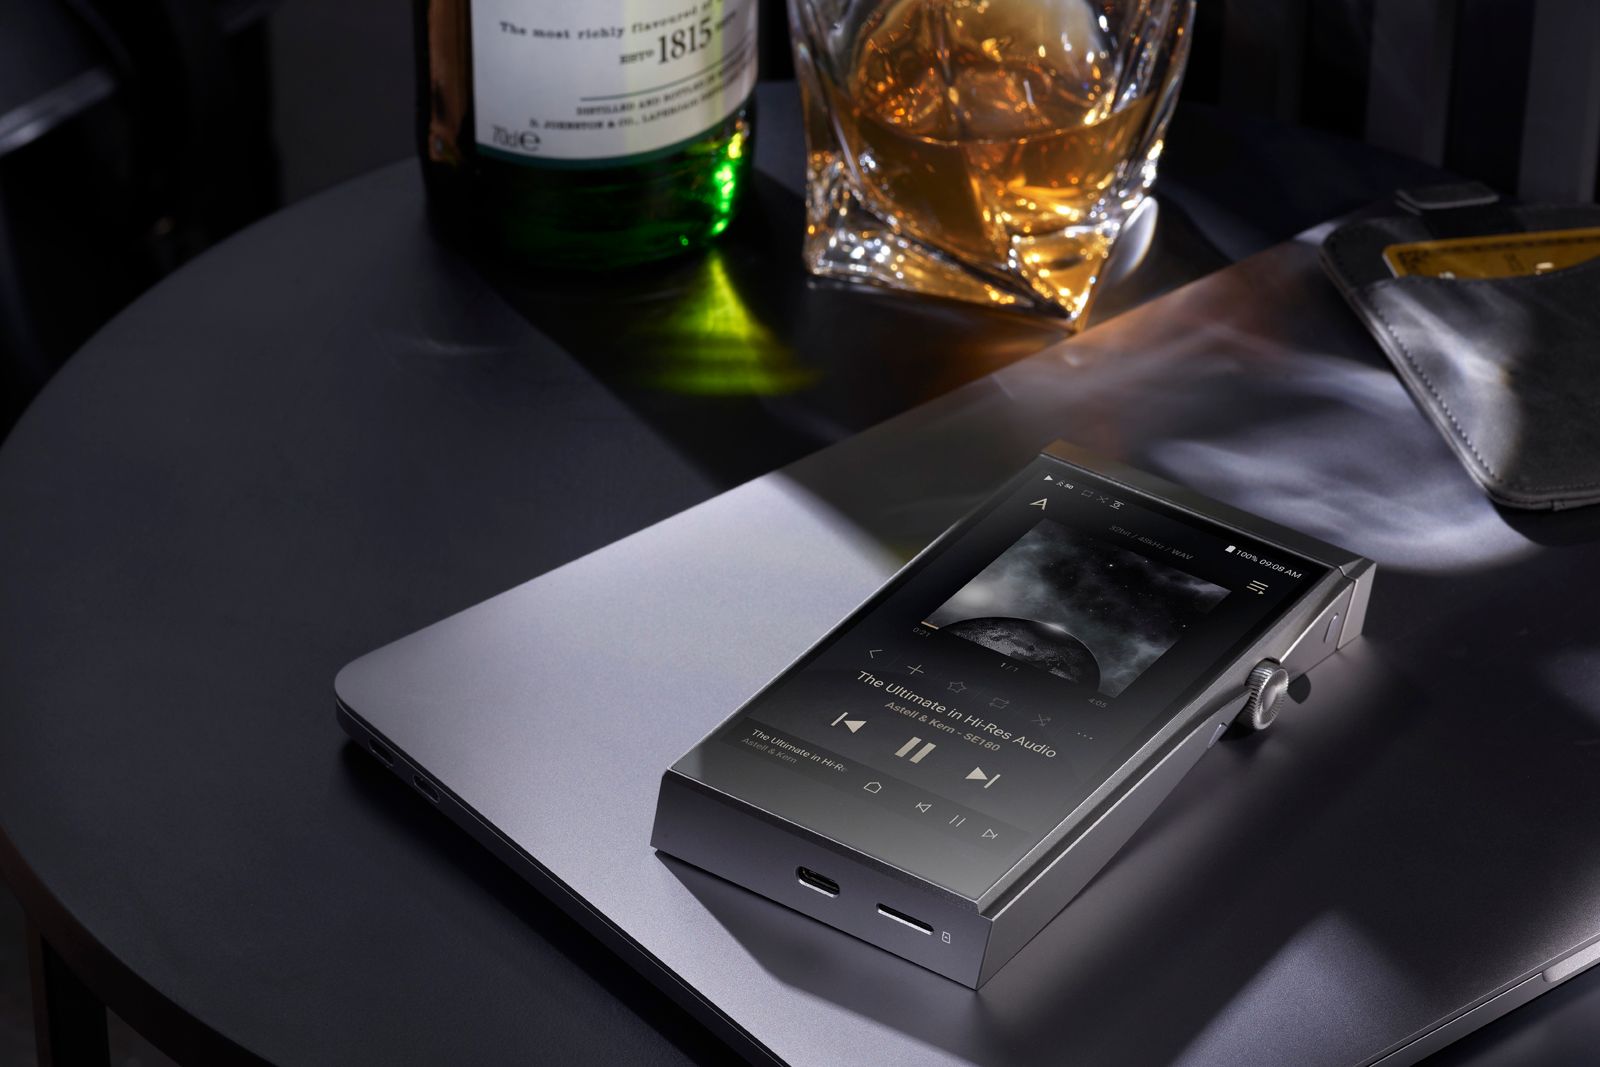 Astell & Kern's latest SE180 digital audio player features interchangeable parts photo 2